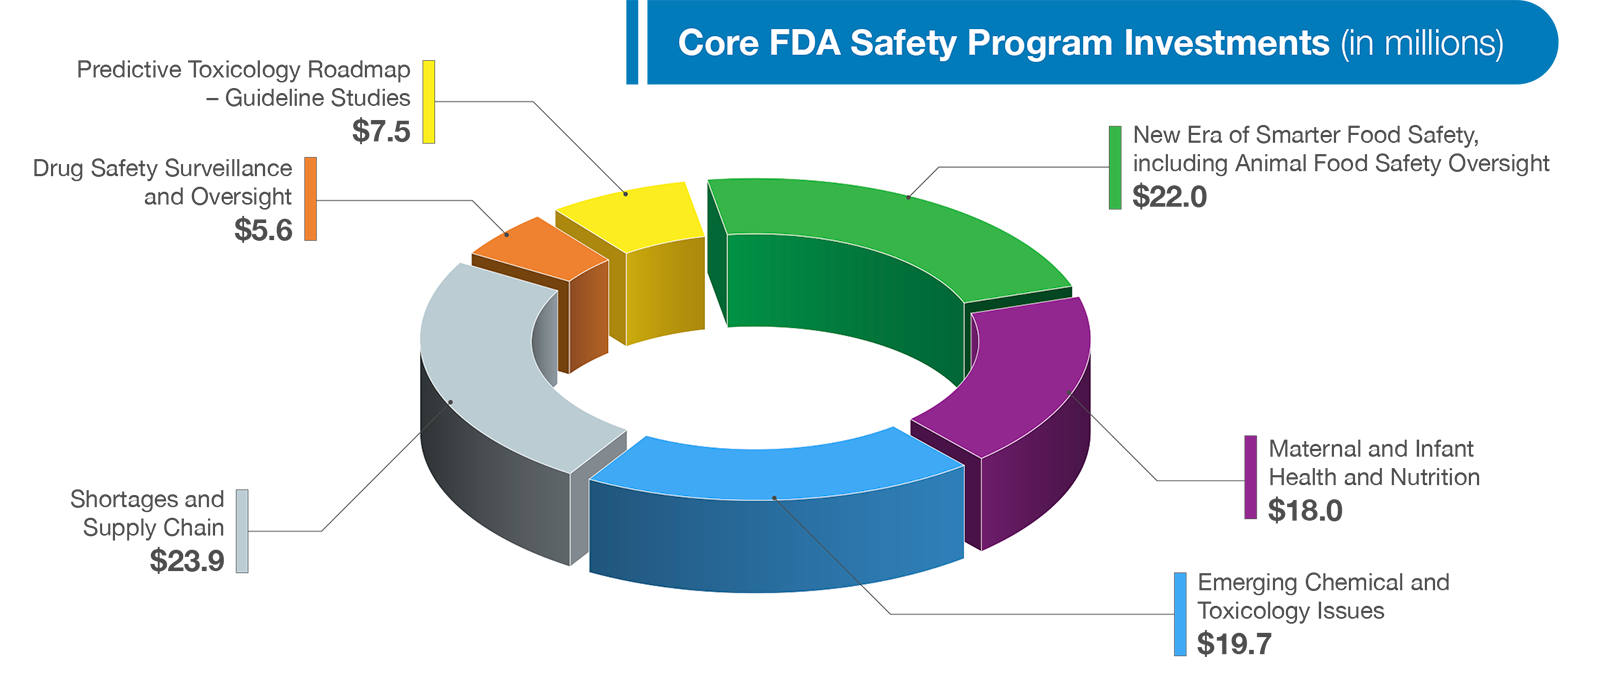 Pie chart of core FDA safety program investments: Shortages and Supply Chain - $23.9 million; New Era of Smarter Food Safety, including Animal Food Safety Oversight - $22.0 million; Emerging Chemical and Toxicology Issues - $19.7 million; Maternal and Infant Health Nutrition - $18.0 million; Predictive Toxicology Roadmap – Guidelines Studies - $7.5 million; Drug Safety Surveillance and Oversight - $5.6 million.